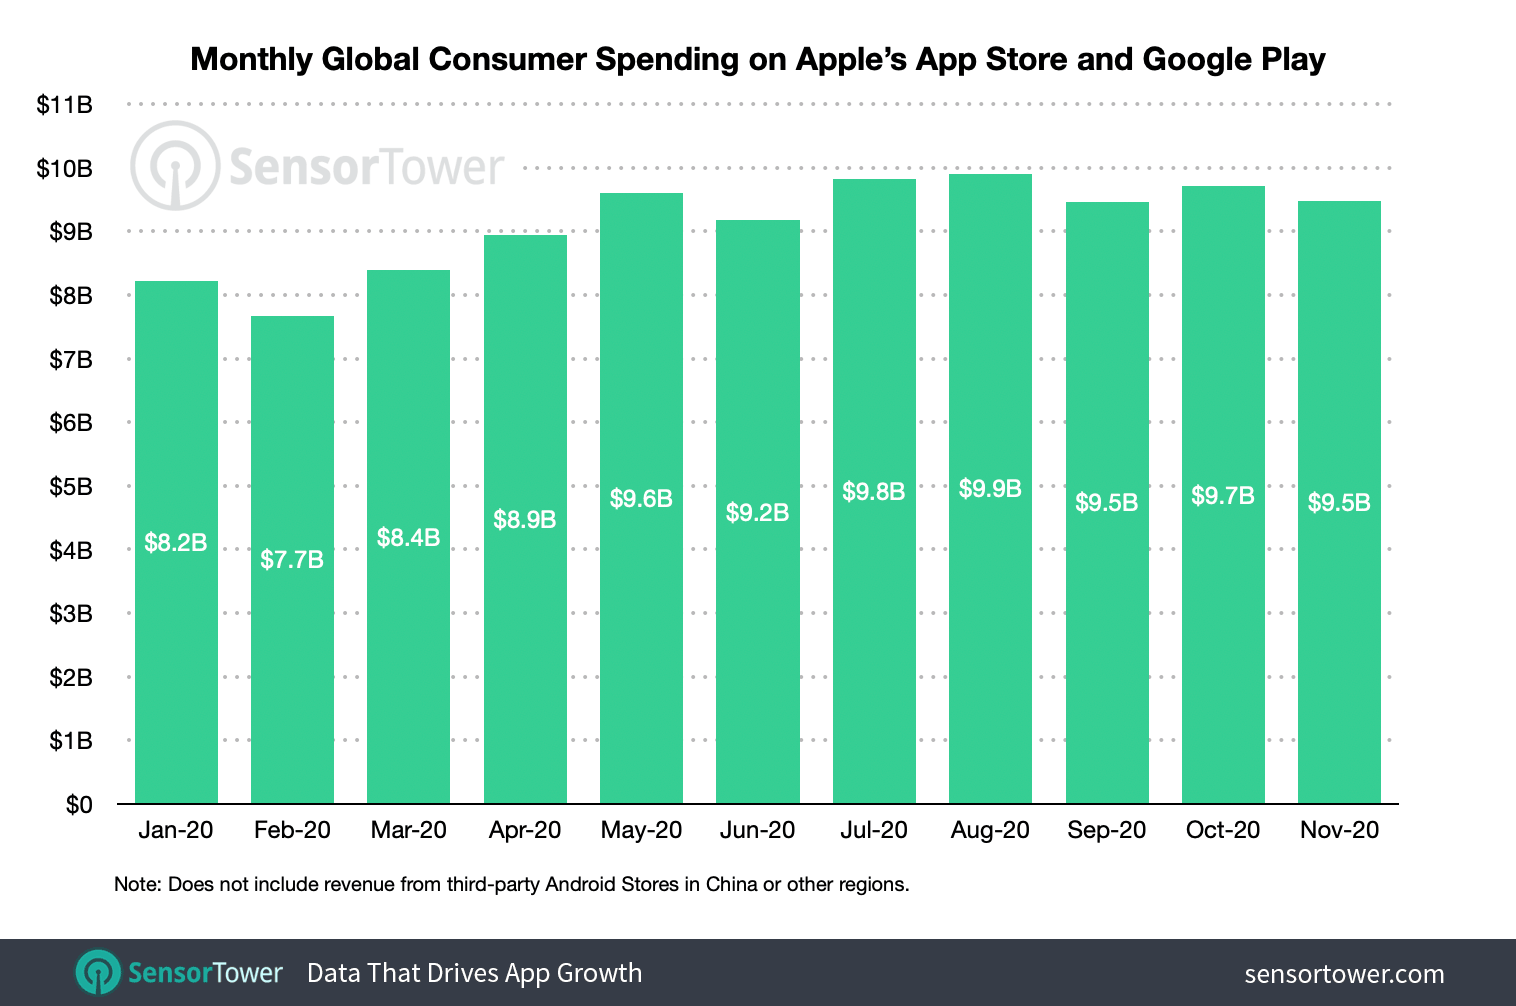 Consumers spent approximately $106 billion across the App Store and Google Play globally from January 1 to December 17.